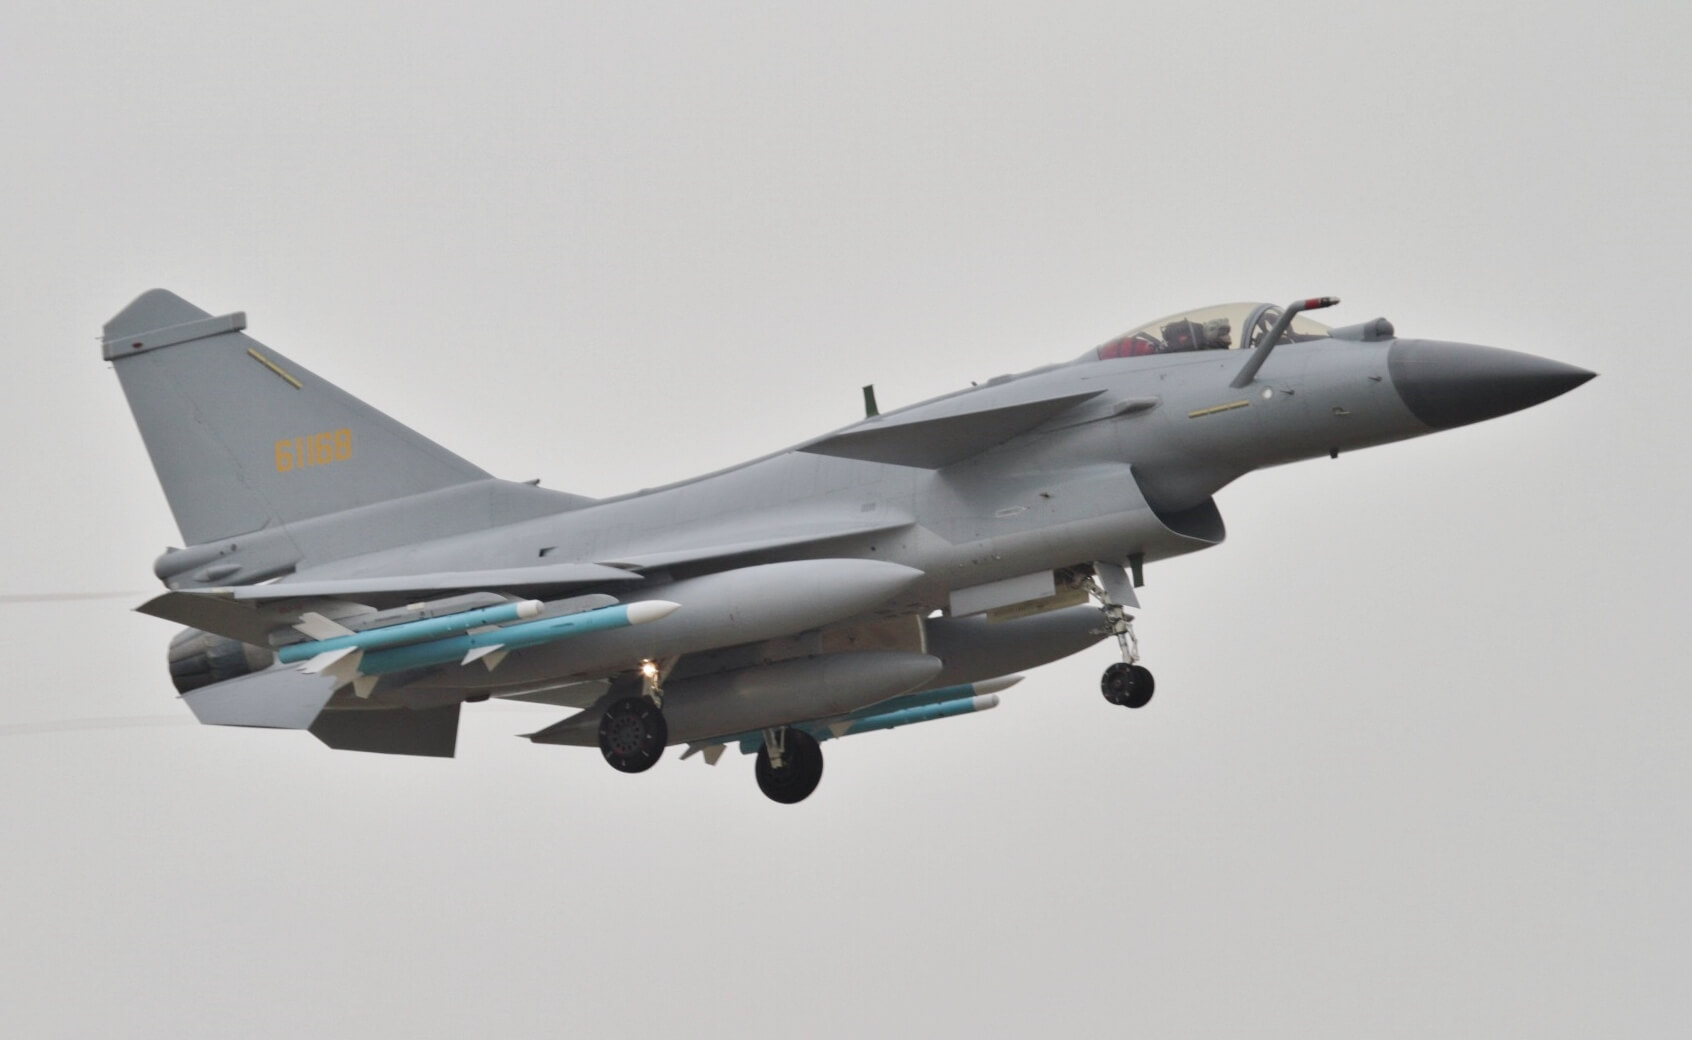 Pakistan Acquires Chinese J-10C Squadron in Response to India’s Rafale Purchase